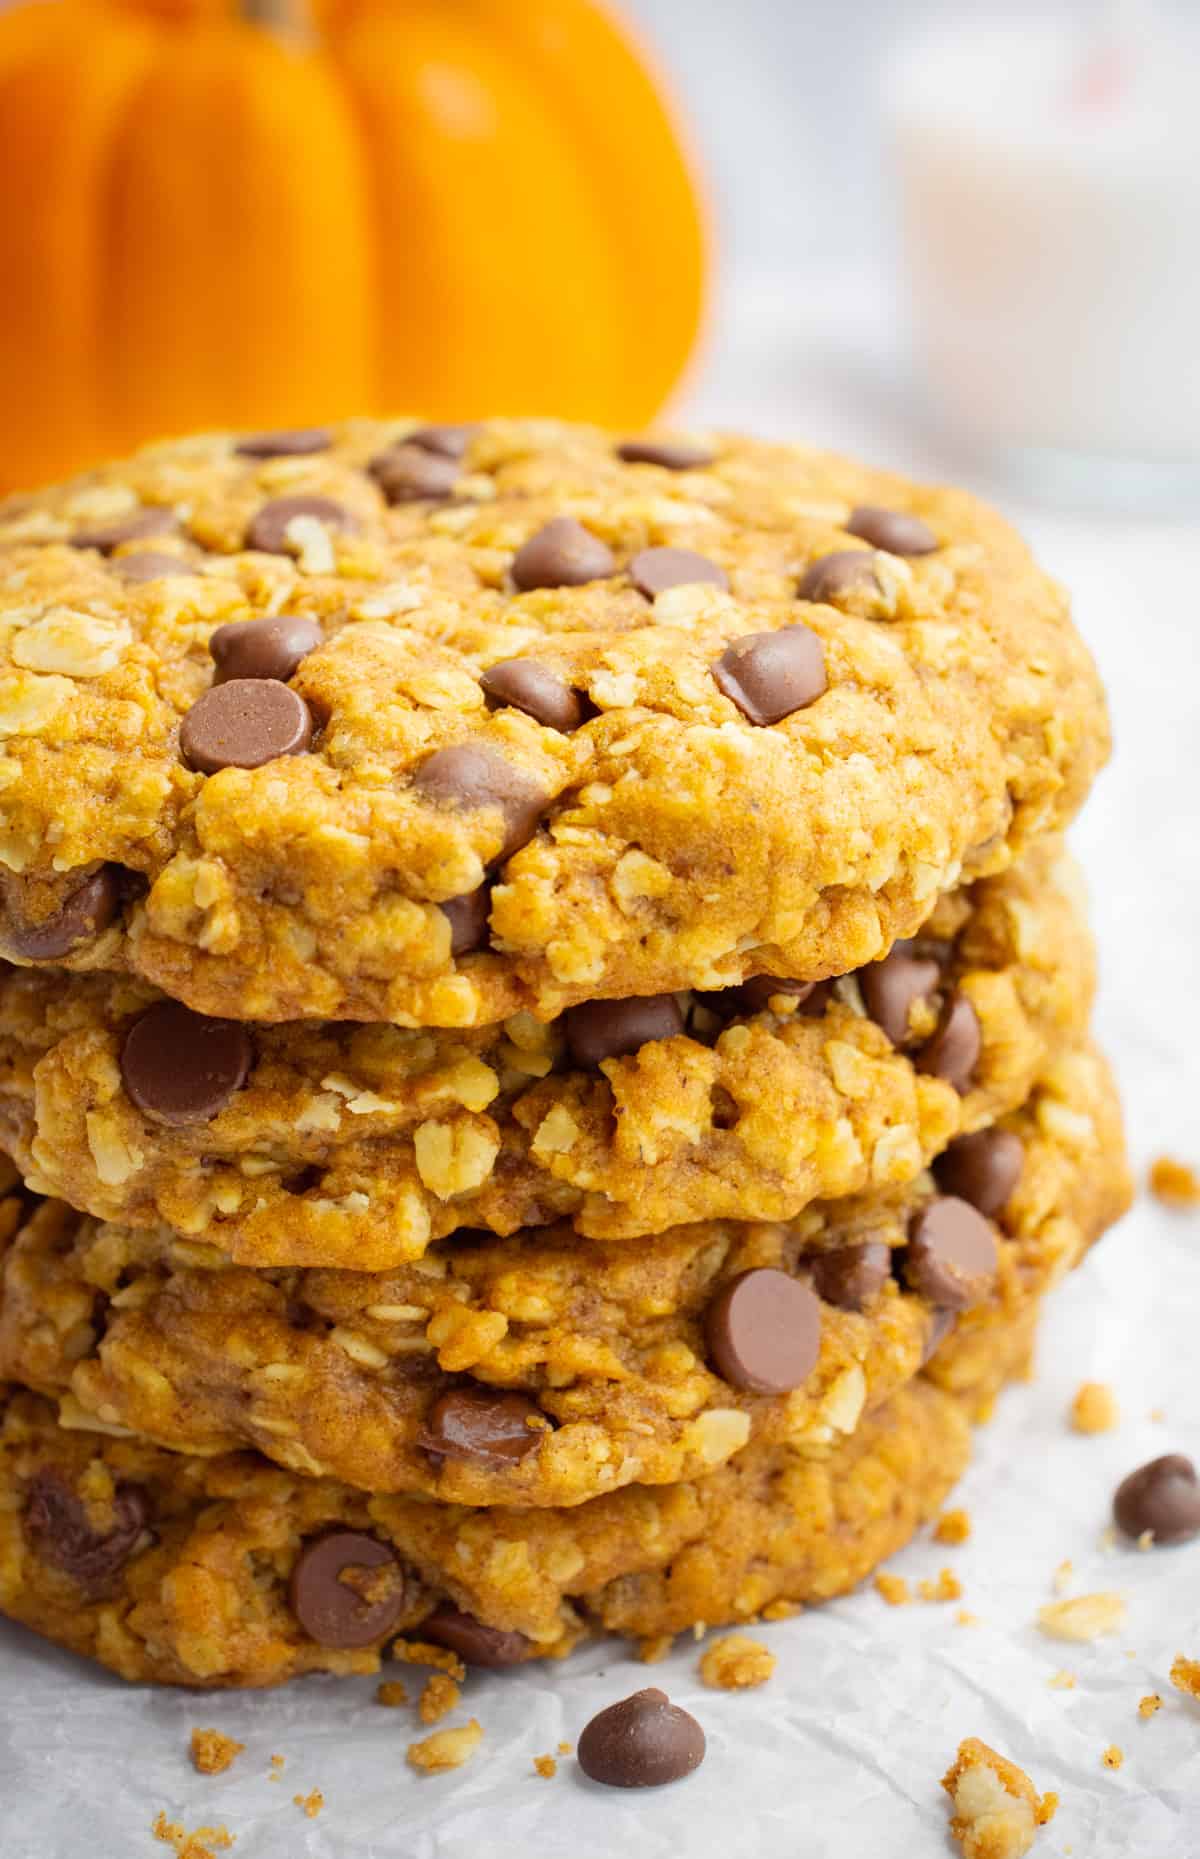 A stack of vegan pumpkin oatmeal cookies with chocolate chips, a glass of almond milk, and an orange pumpkin in the background.